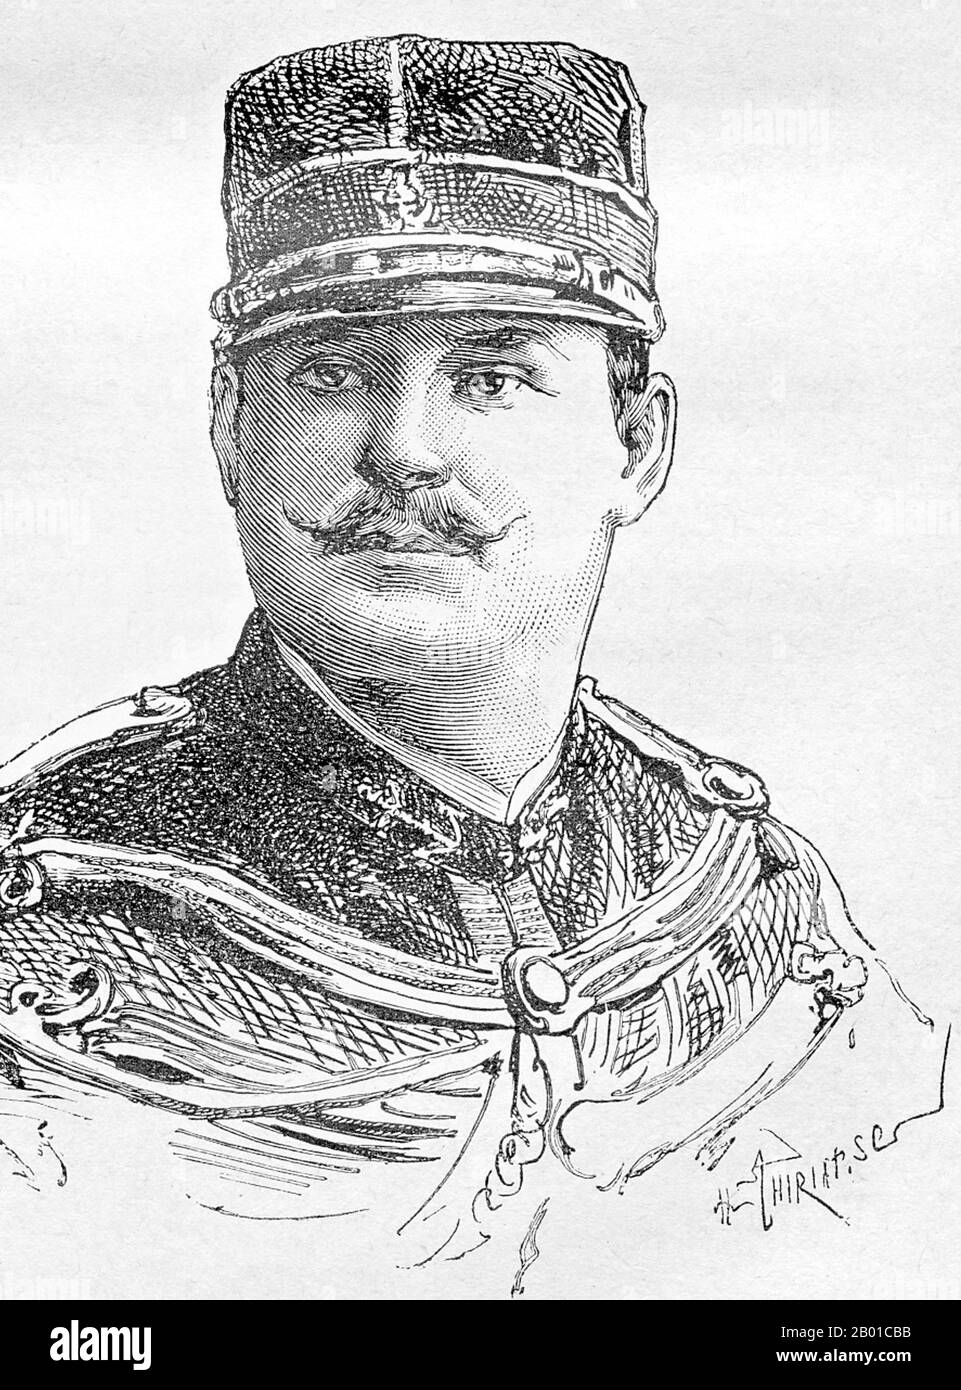 Vietnam: 2nd Lieutenant Bossant, marine infantry, killed in action in the Battle of Bac Vie, 12 February 1885. Lithograph portrait by Paul Henri Thiriat (30 December 1868 - 11 April 1943), 1887.  The Tonkin Campaign (French: Campagne du Tonkin) was an armed conflict fought between June 1883 and April 1886 by the French against, variously, the Vietnamese, Liu Yongfu's Black Flag Army and the Chinese Guangxi and Yunnan armies to occupy Tonkin (northern Vietnam) and entrench a French protectorate there. Stock Photo